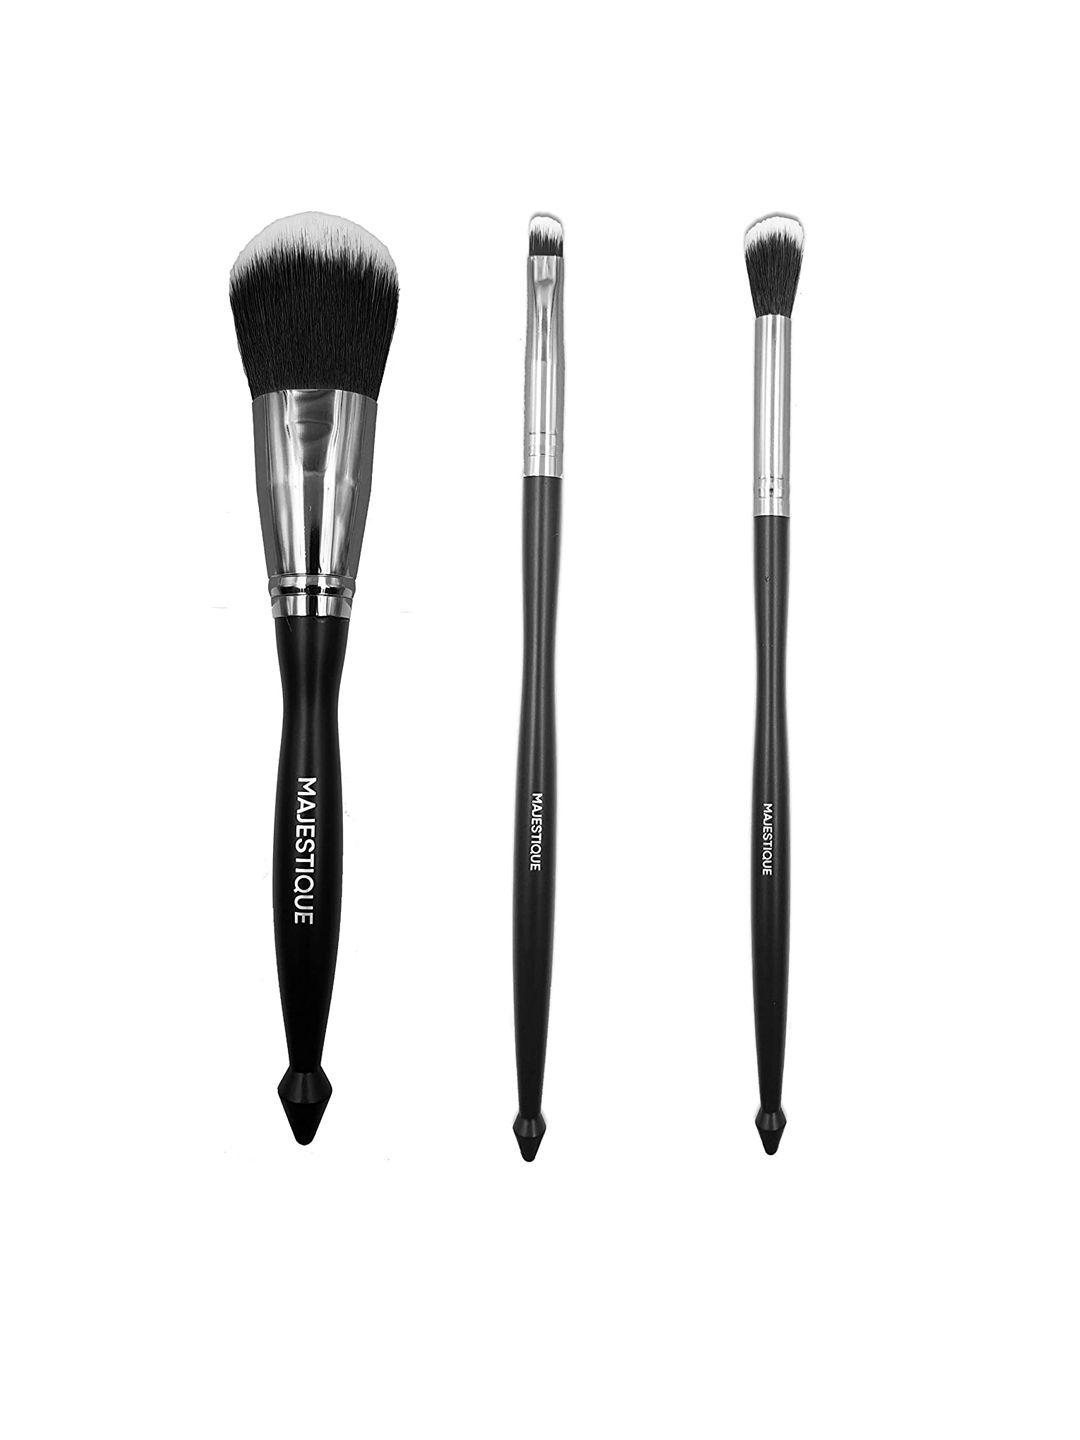 majestique set of 3 premium synthetic professional makeup brushes